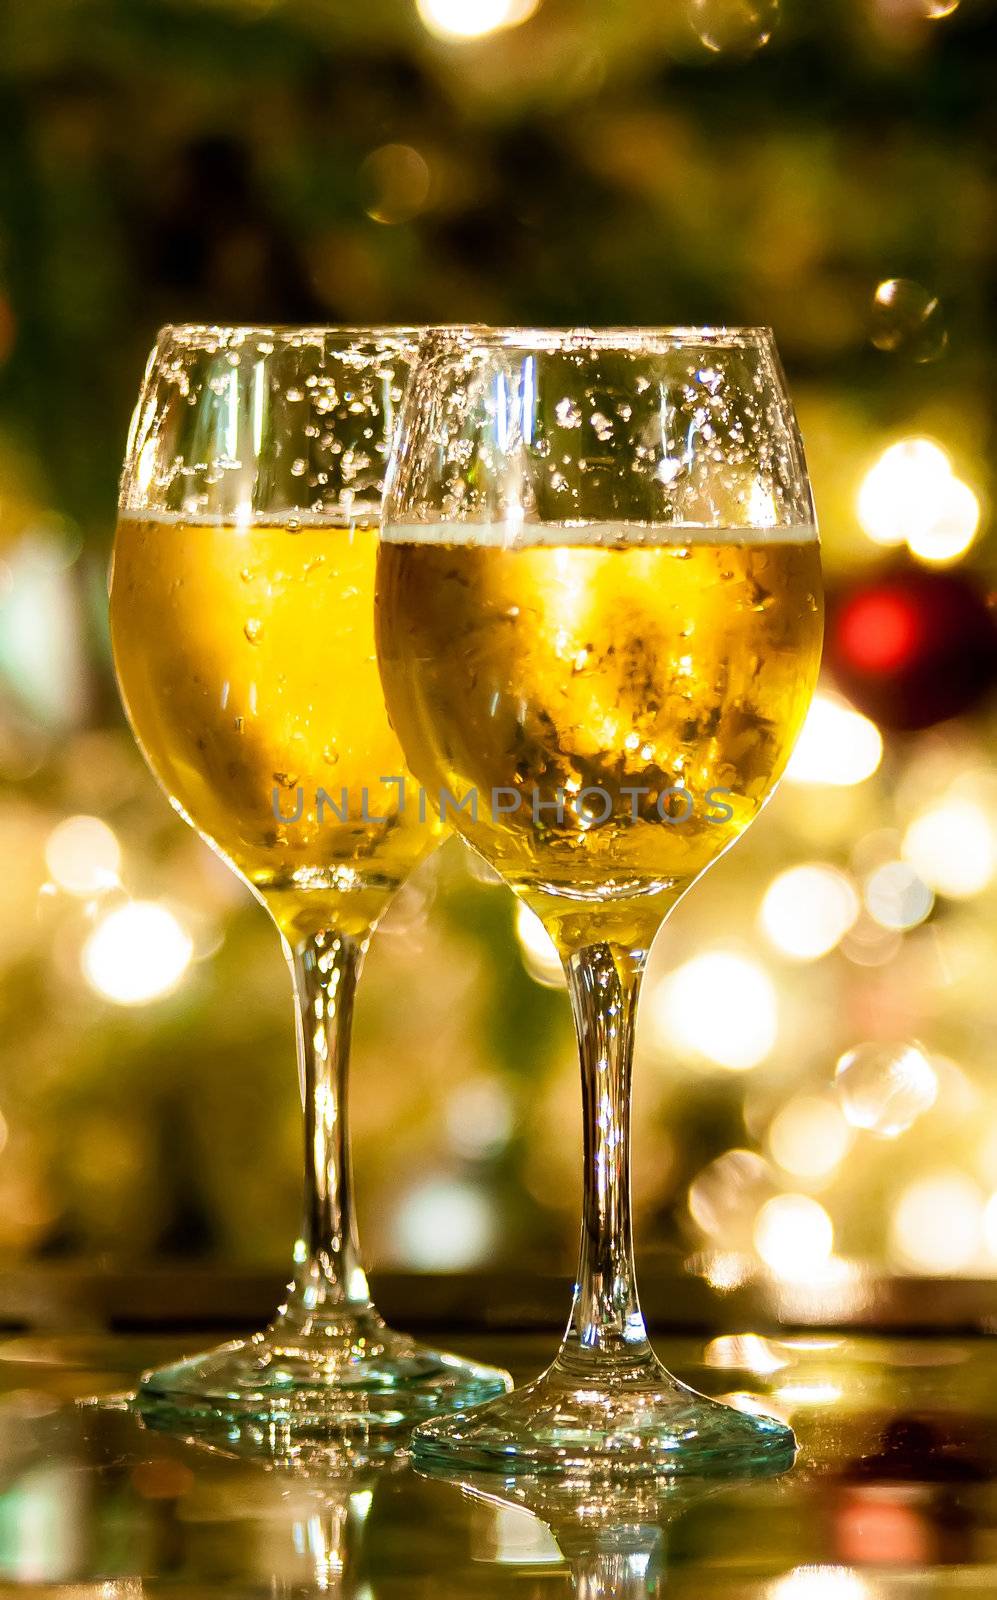 Two champagne glasses ready to bring in the New Year by digidreamgrafix